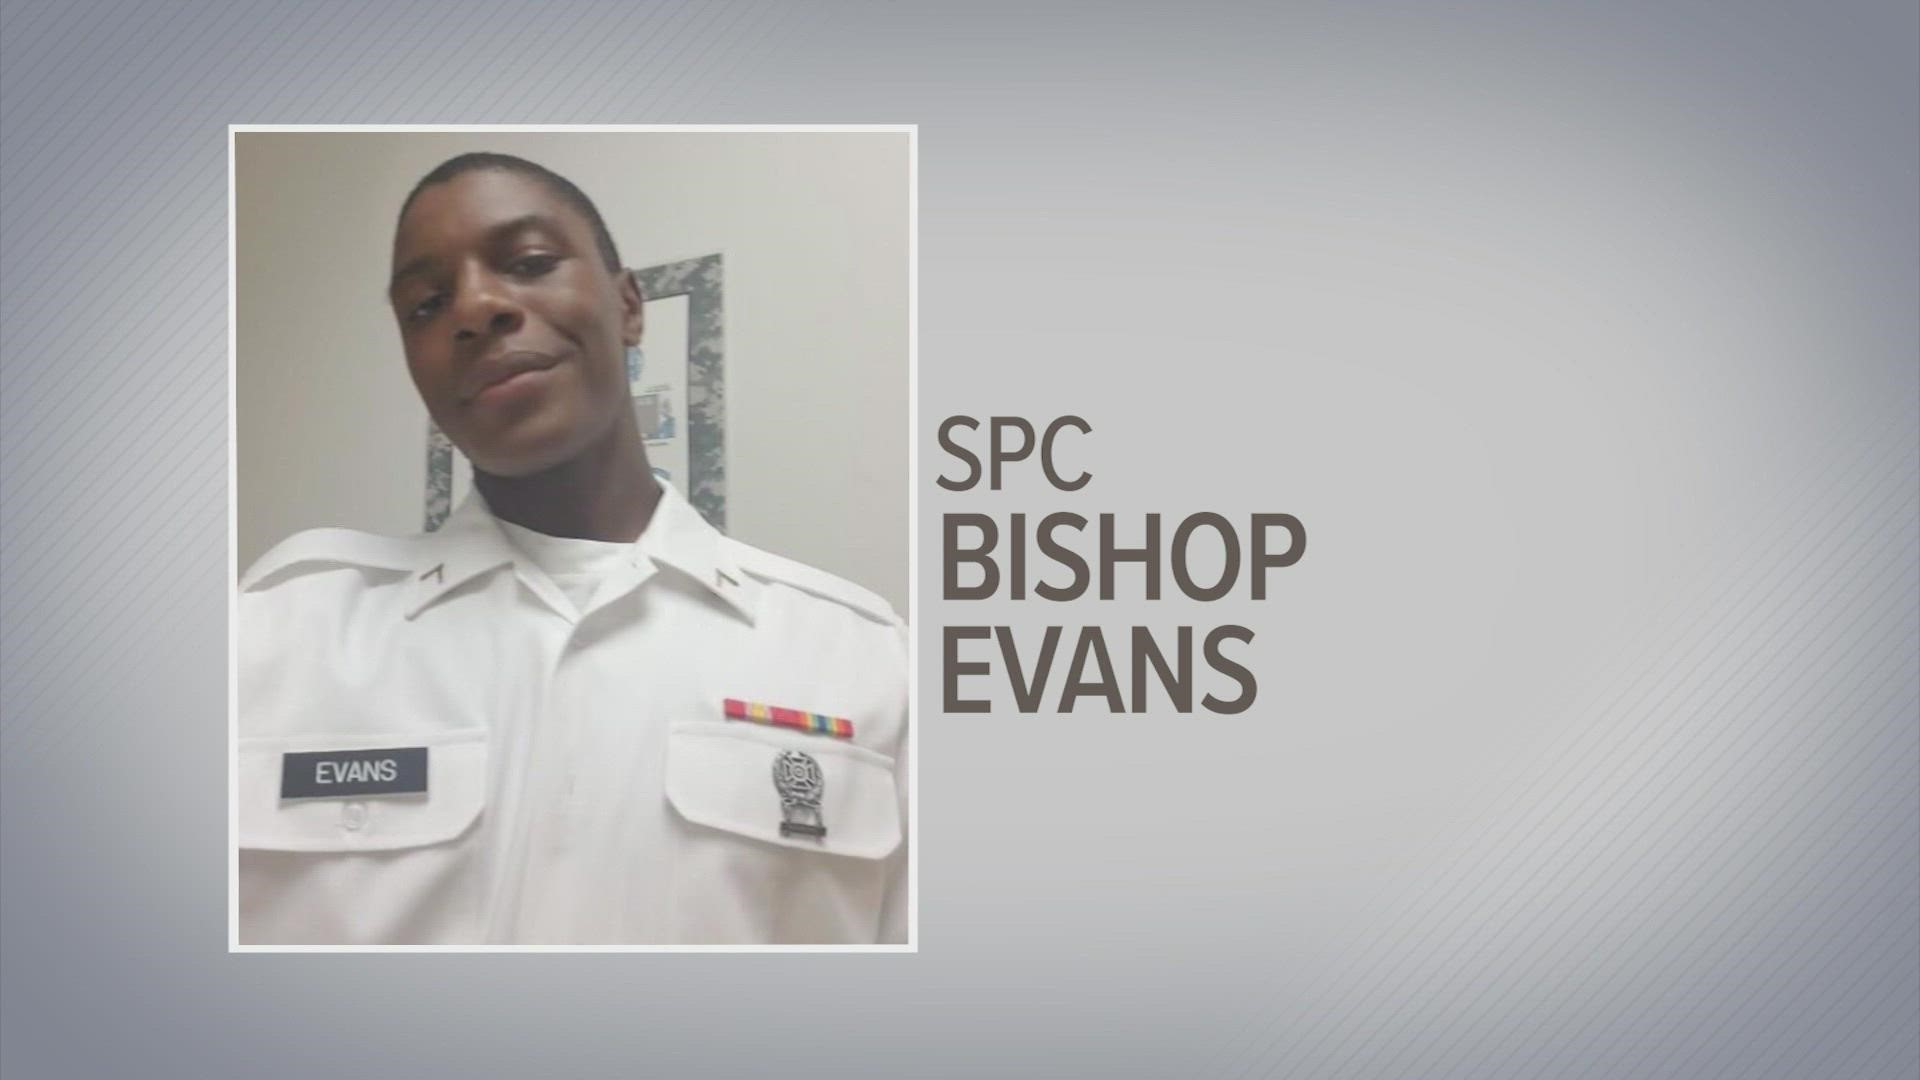 The Texas Military Department identified Spc. Bishop E. Evans as the missing National Guardsman on Sunday.